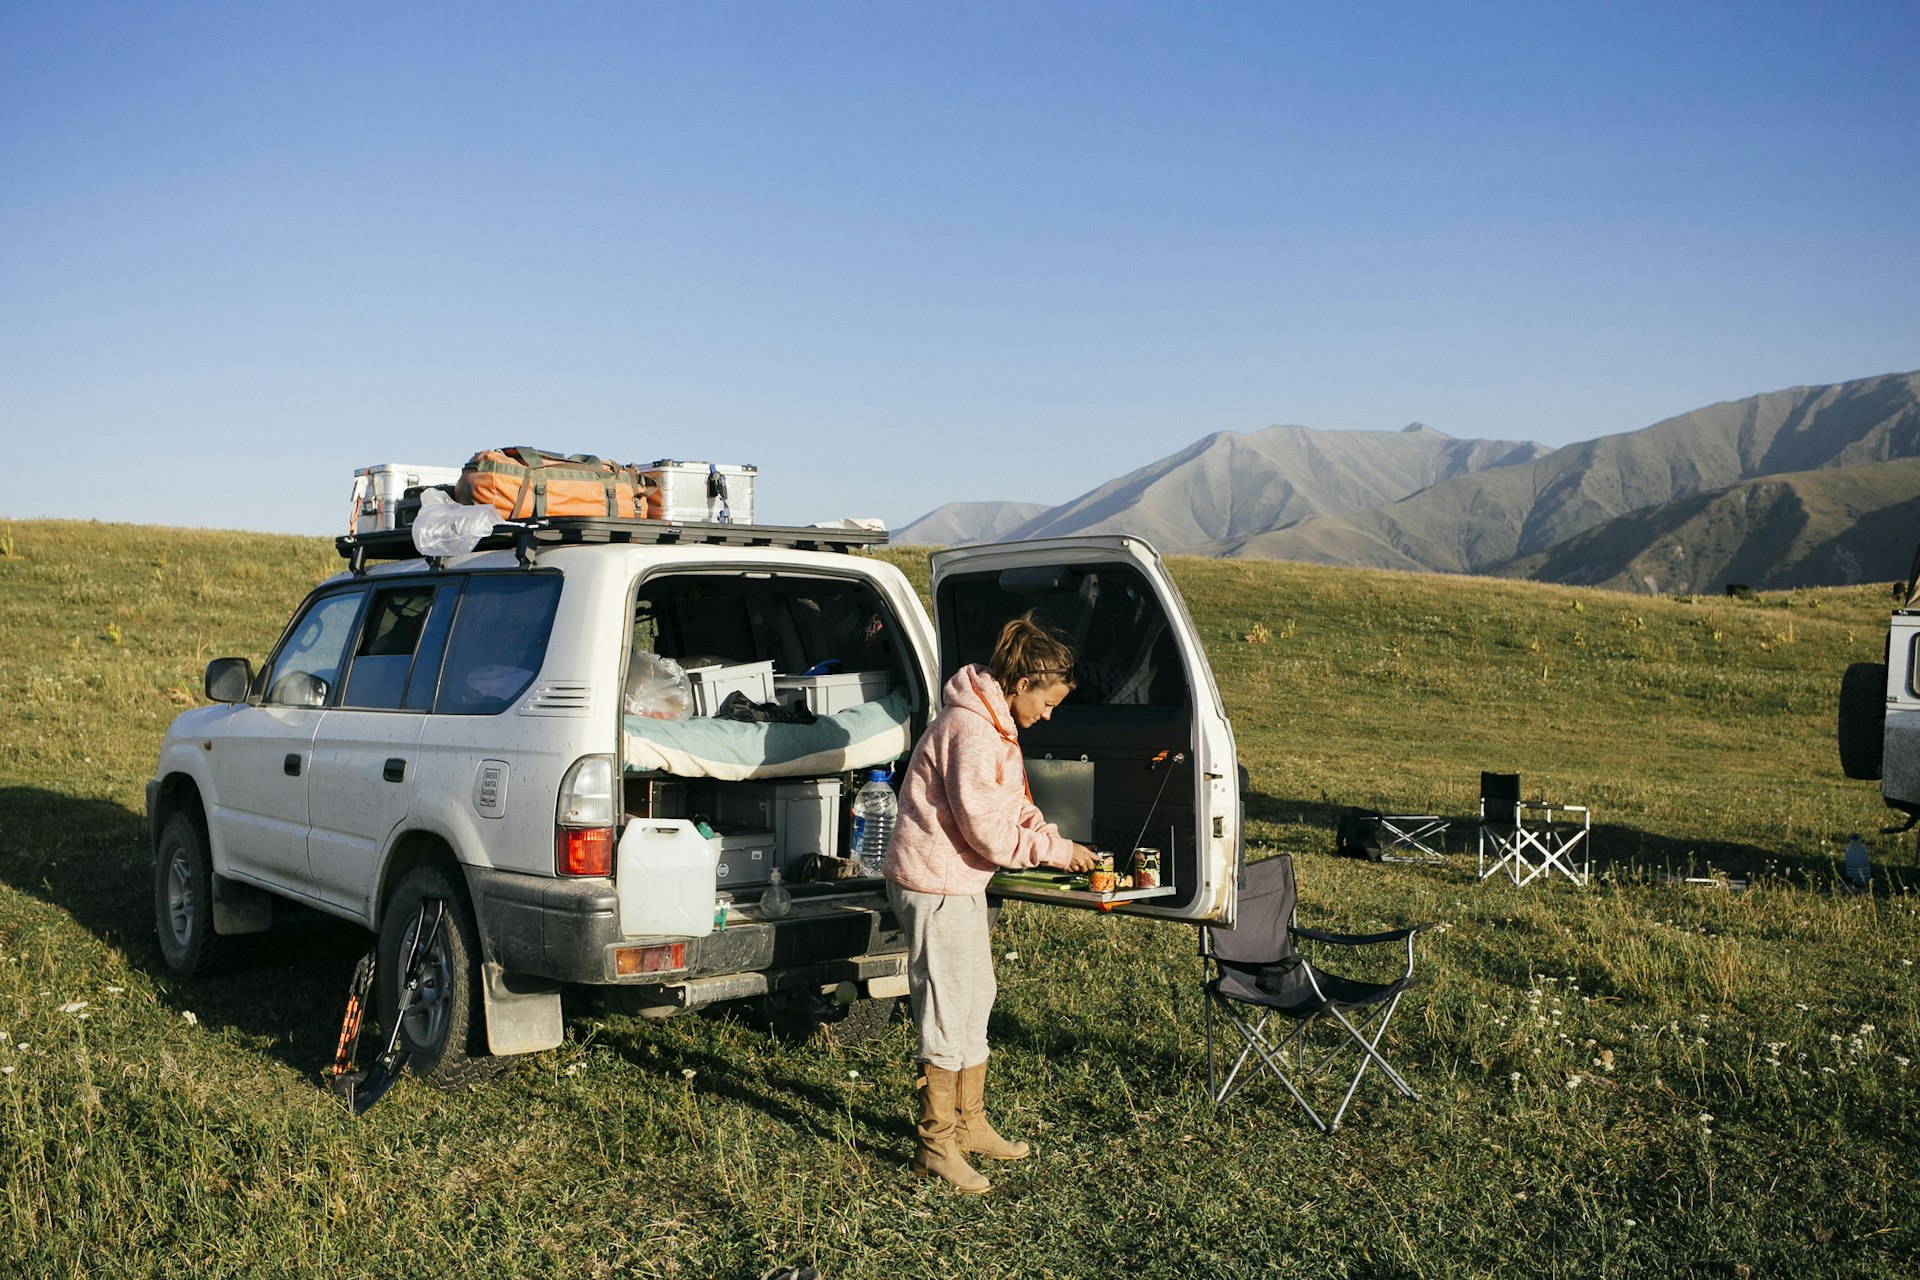 A woman stands behind a fully packed 4WD prepping food in a meadow